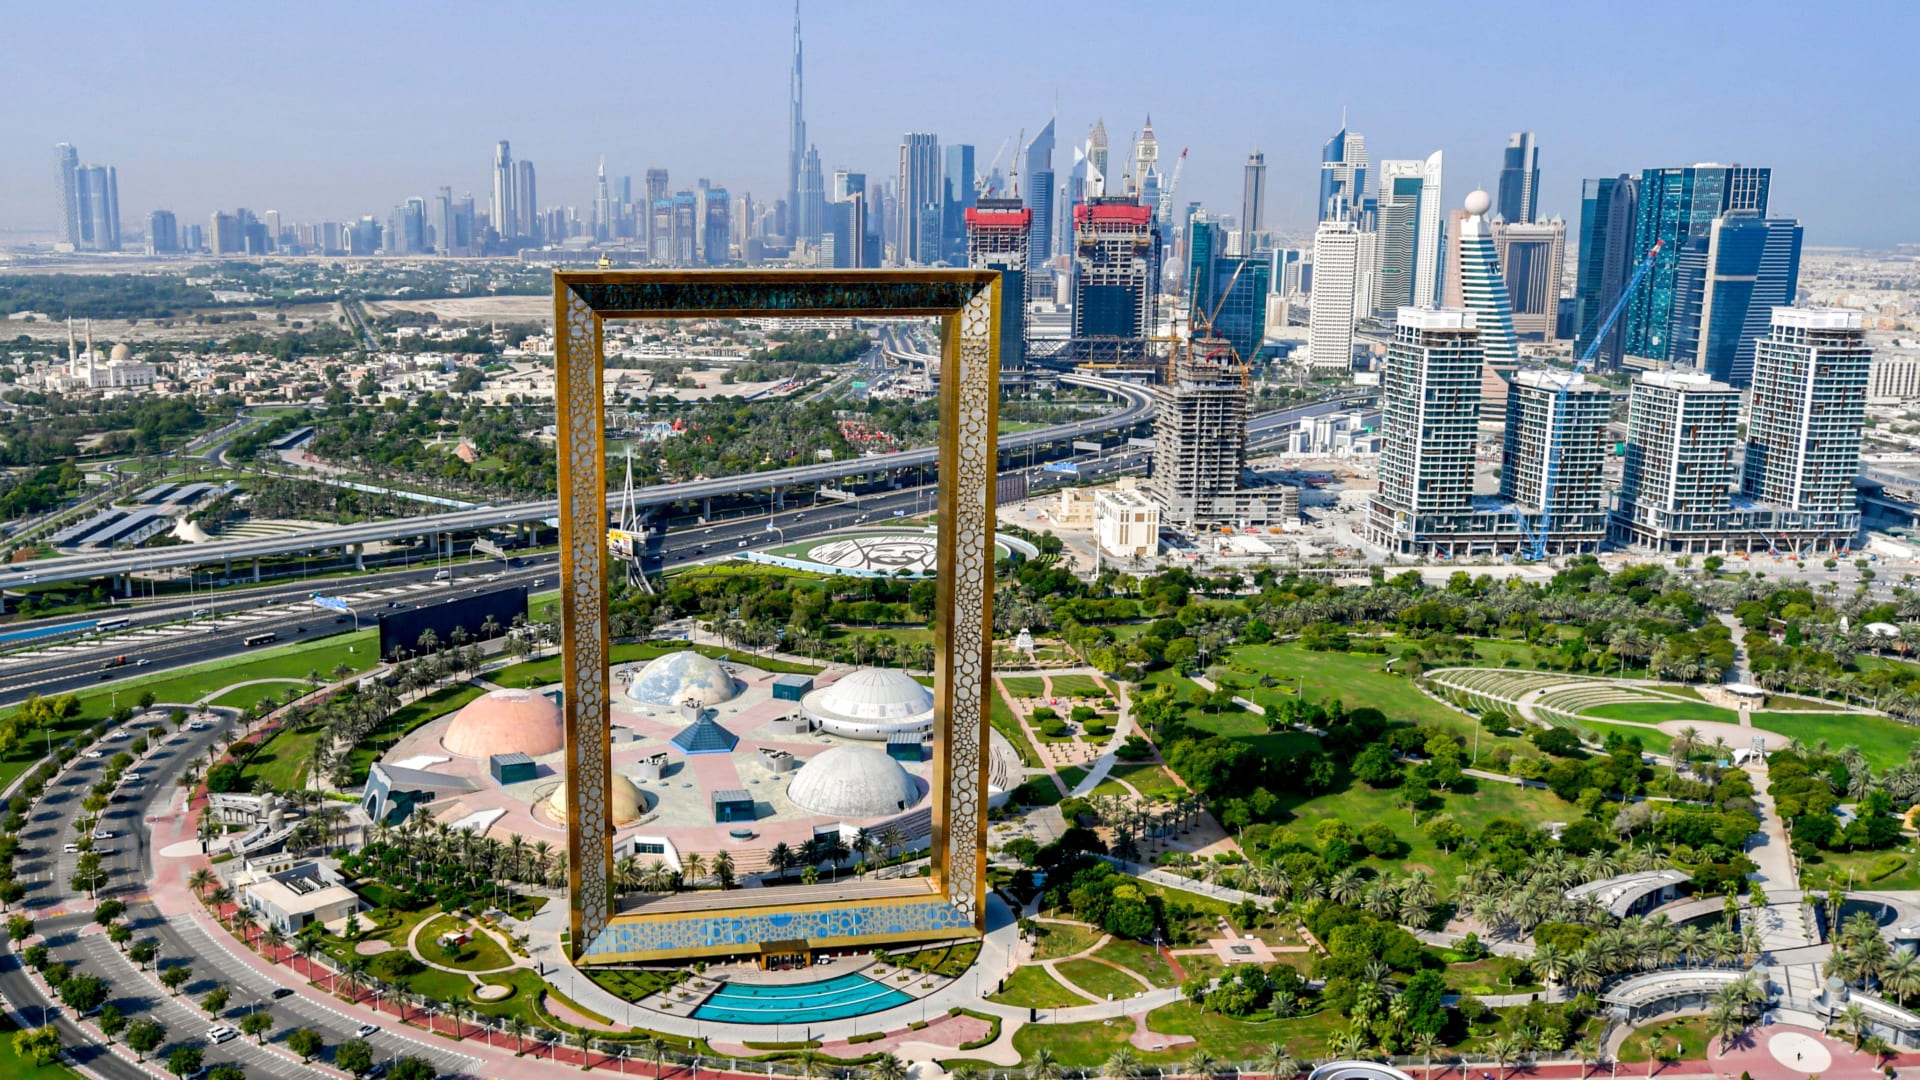 For an exciting holiday..here are 14 experiences you can have in Dubai